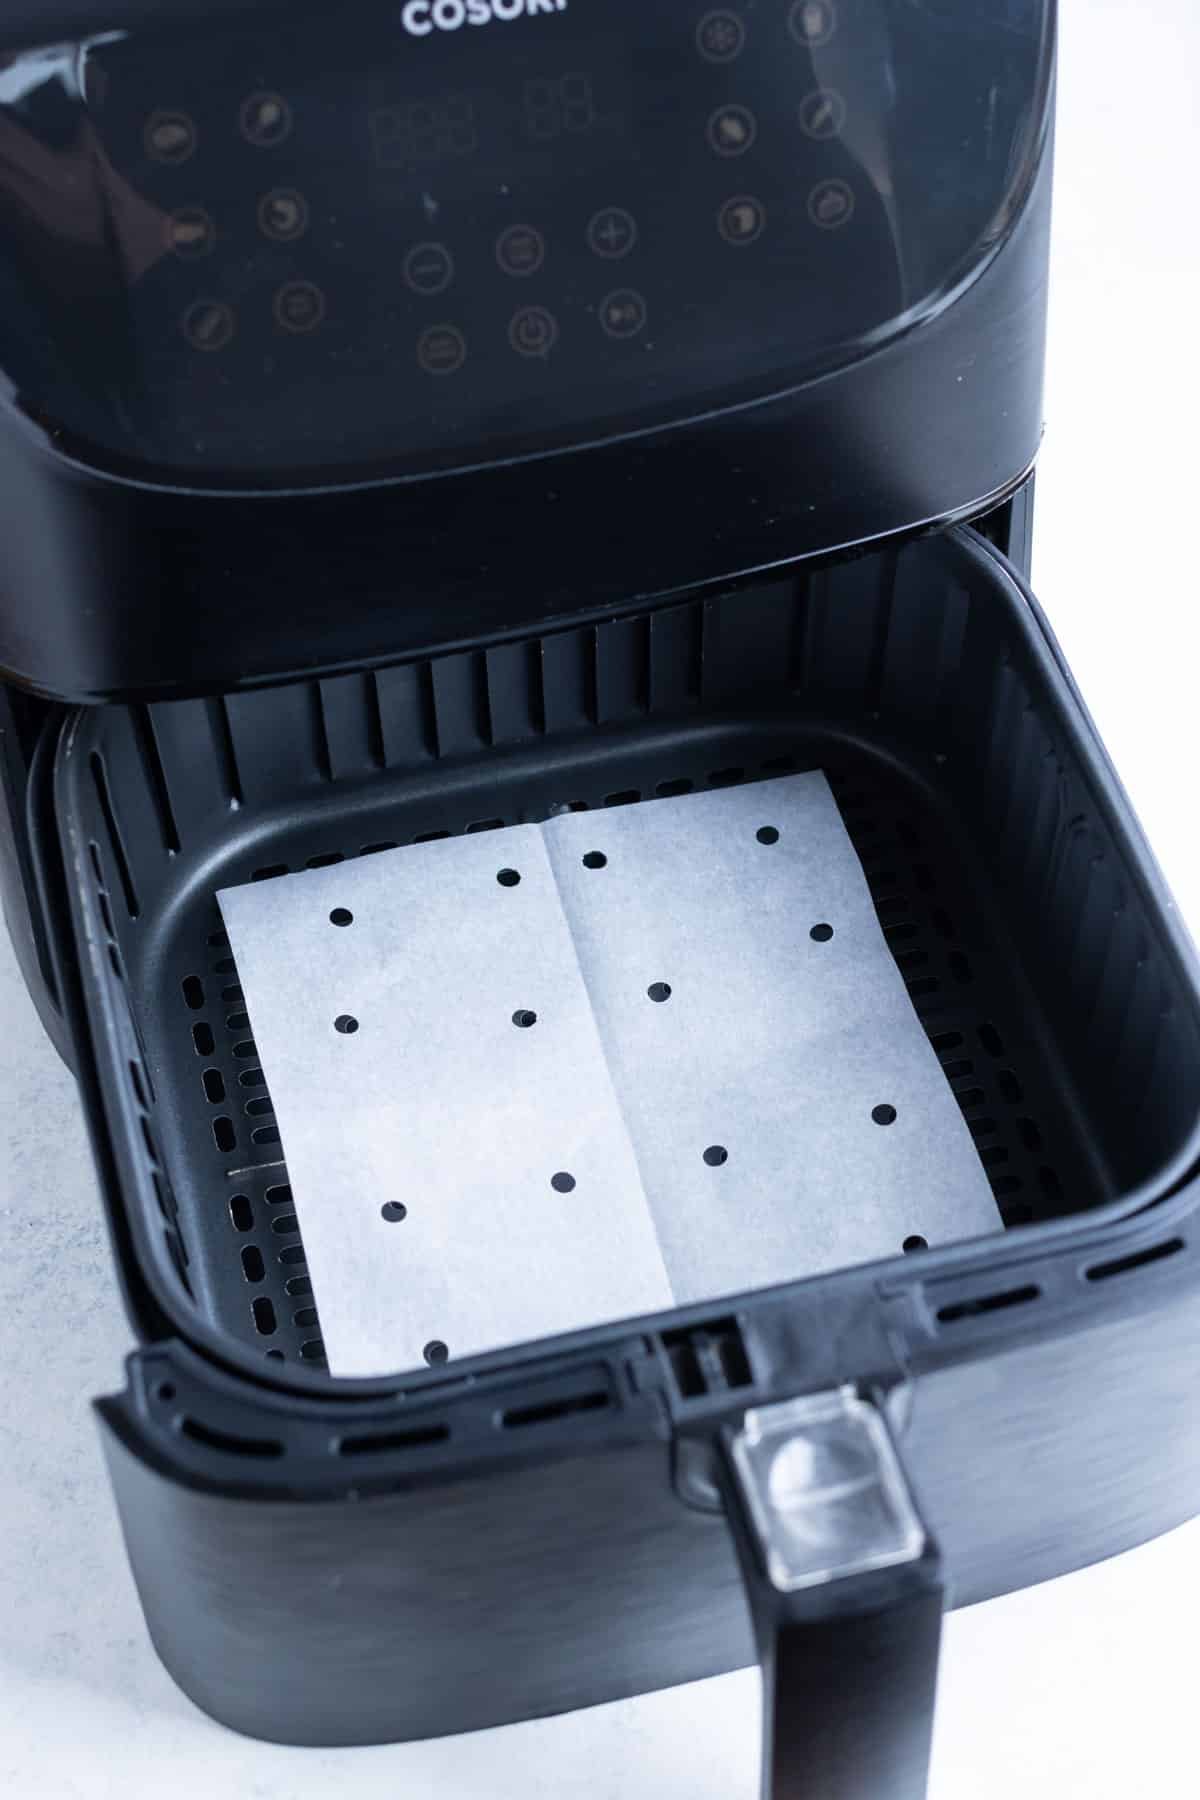 Parchment paper place in the bottom of an air fryer basket with hole punches.